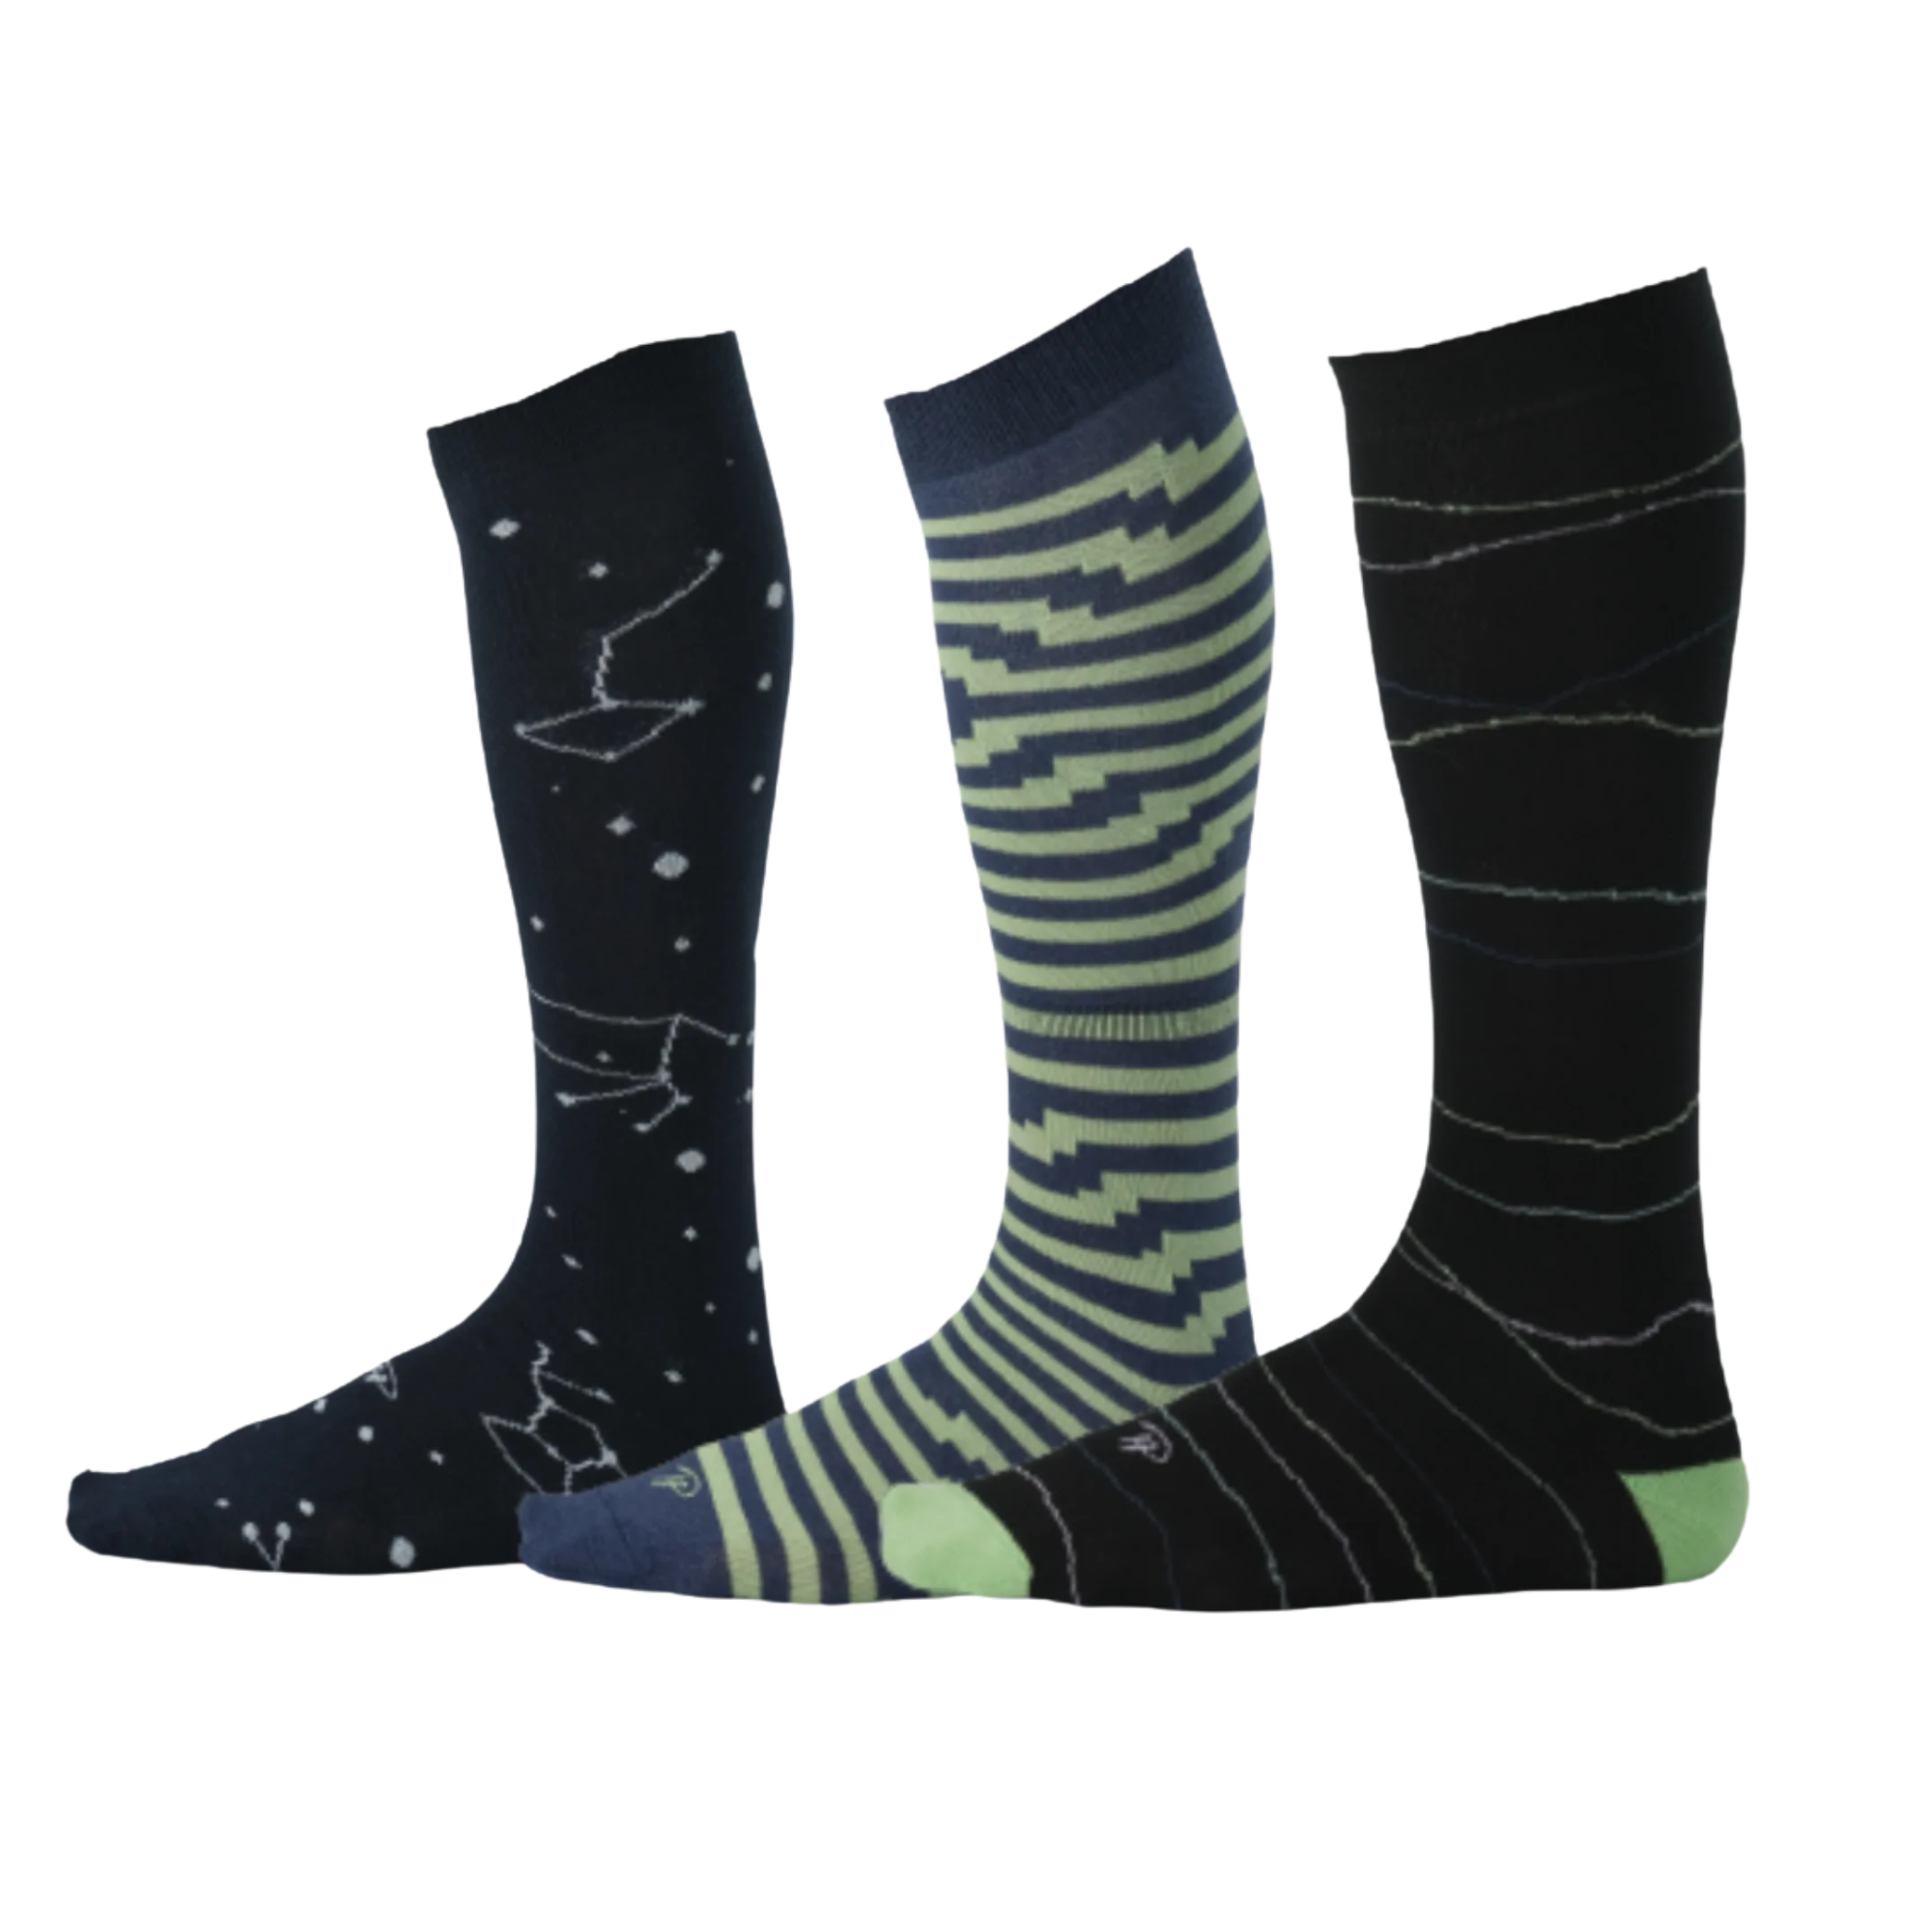 navy blue dress socks with constellations, blue dress socks with green stripes, black dress socks with green squiggly lines 